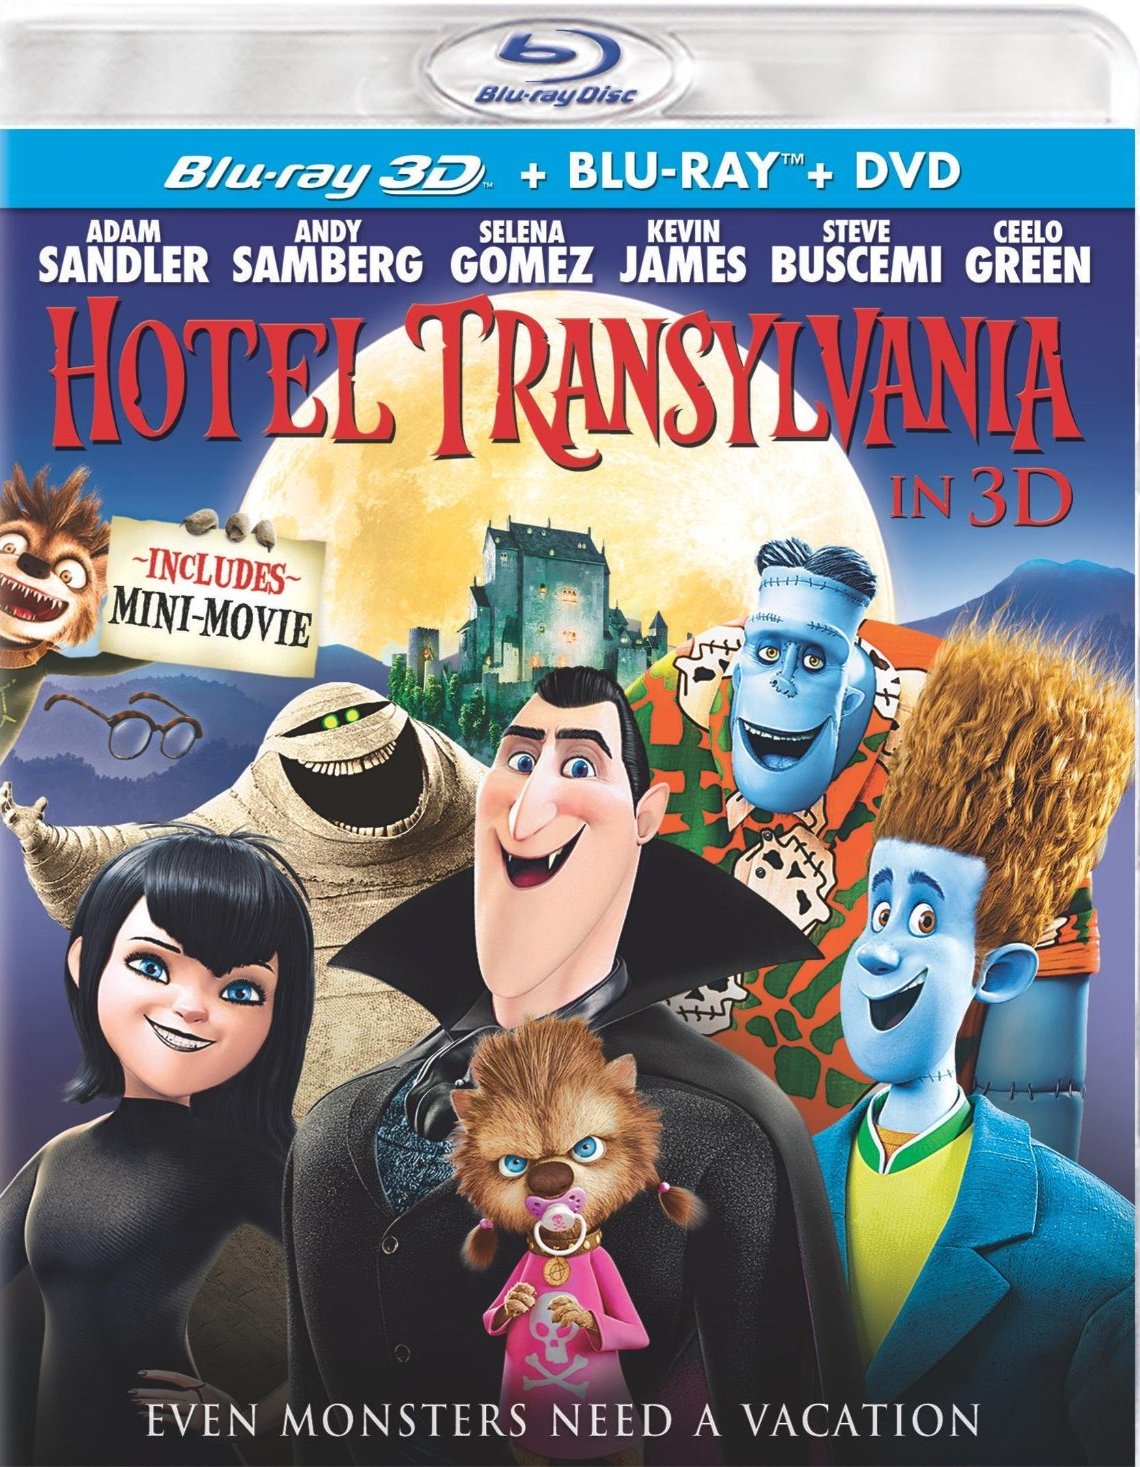 3d Lesbian Selena Gomez - HOTEL TRANSYLVANIA Highlights this week in Blu-ray and DVD Releases -  Assignment X